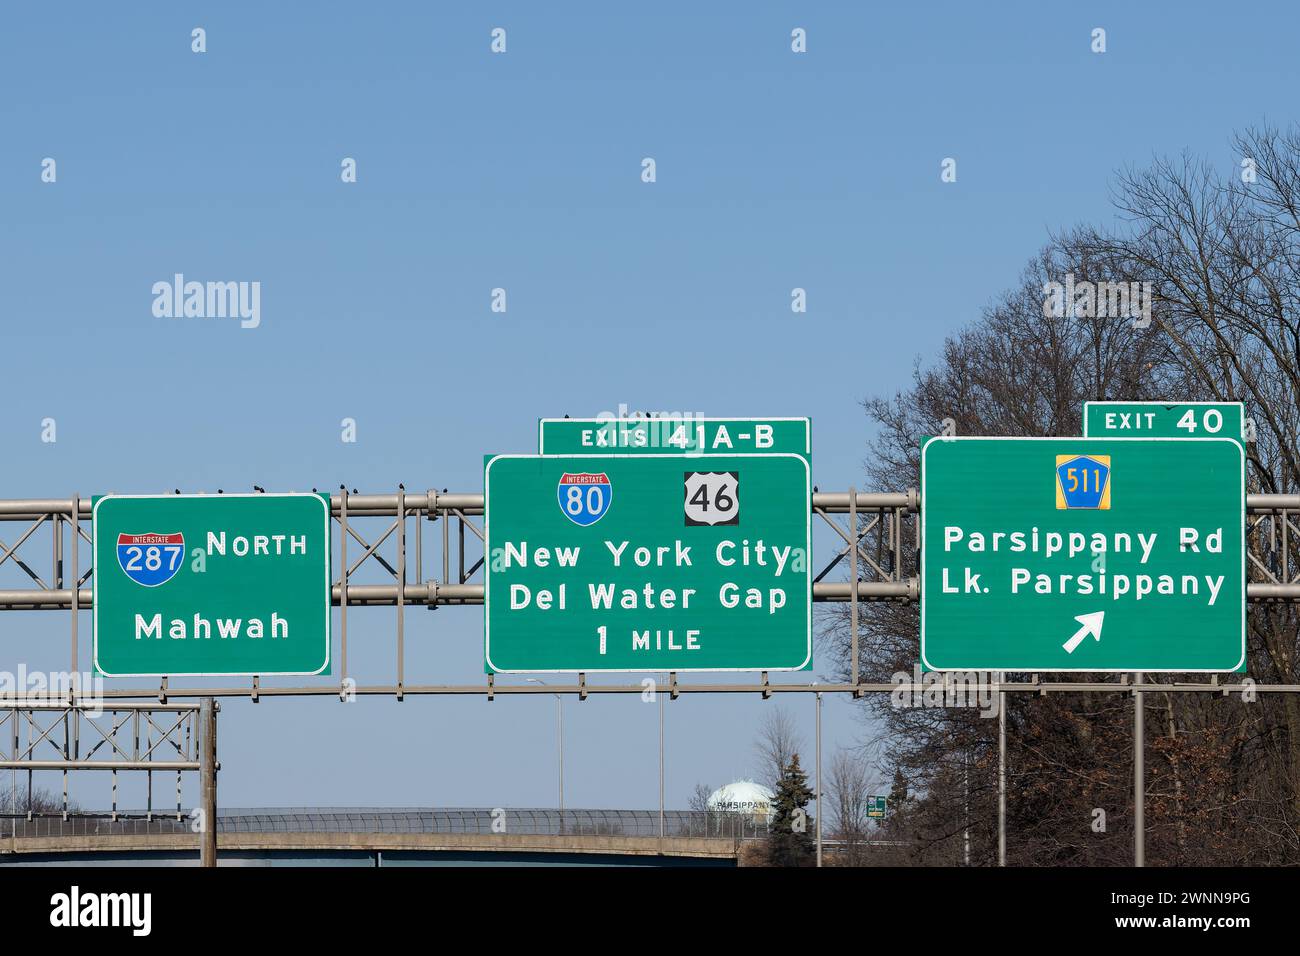 highway exit signs for Interstate 287 North toward Mahwah, New Jersey, Interstate 80 and US-46 toward New York City and Delaware Water Gap, and County Stock Photo